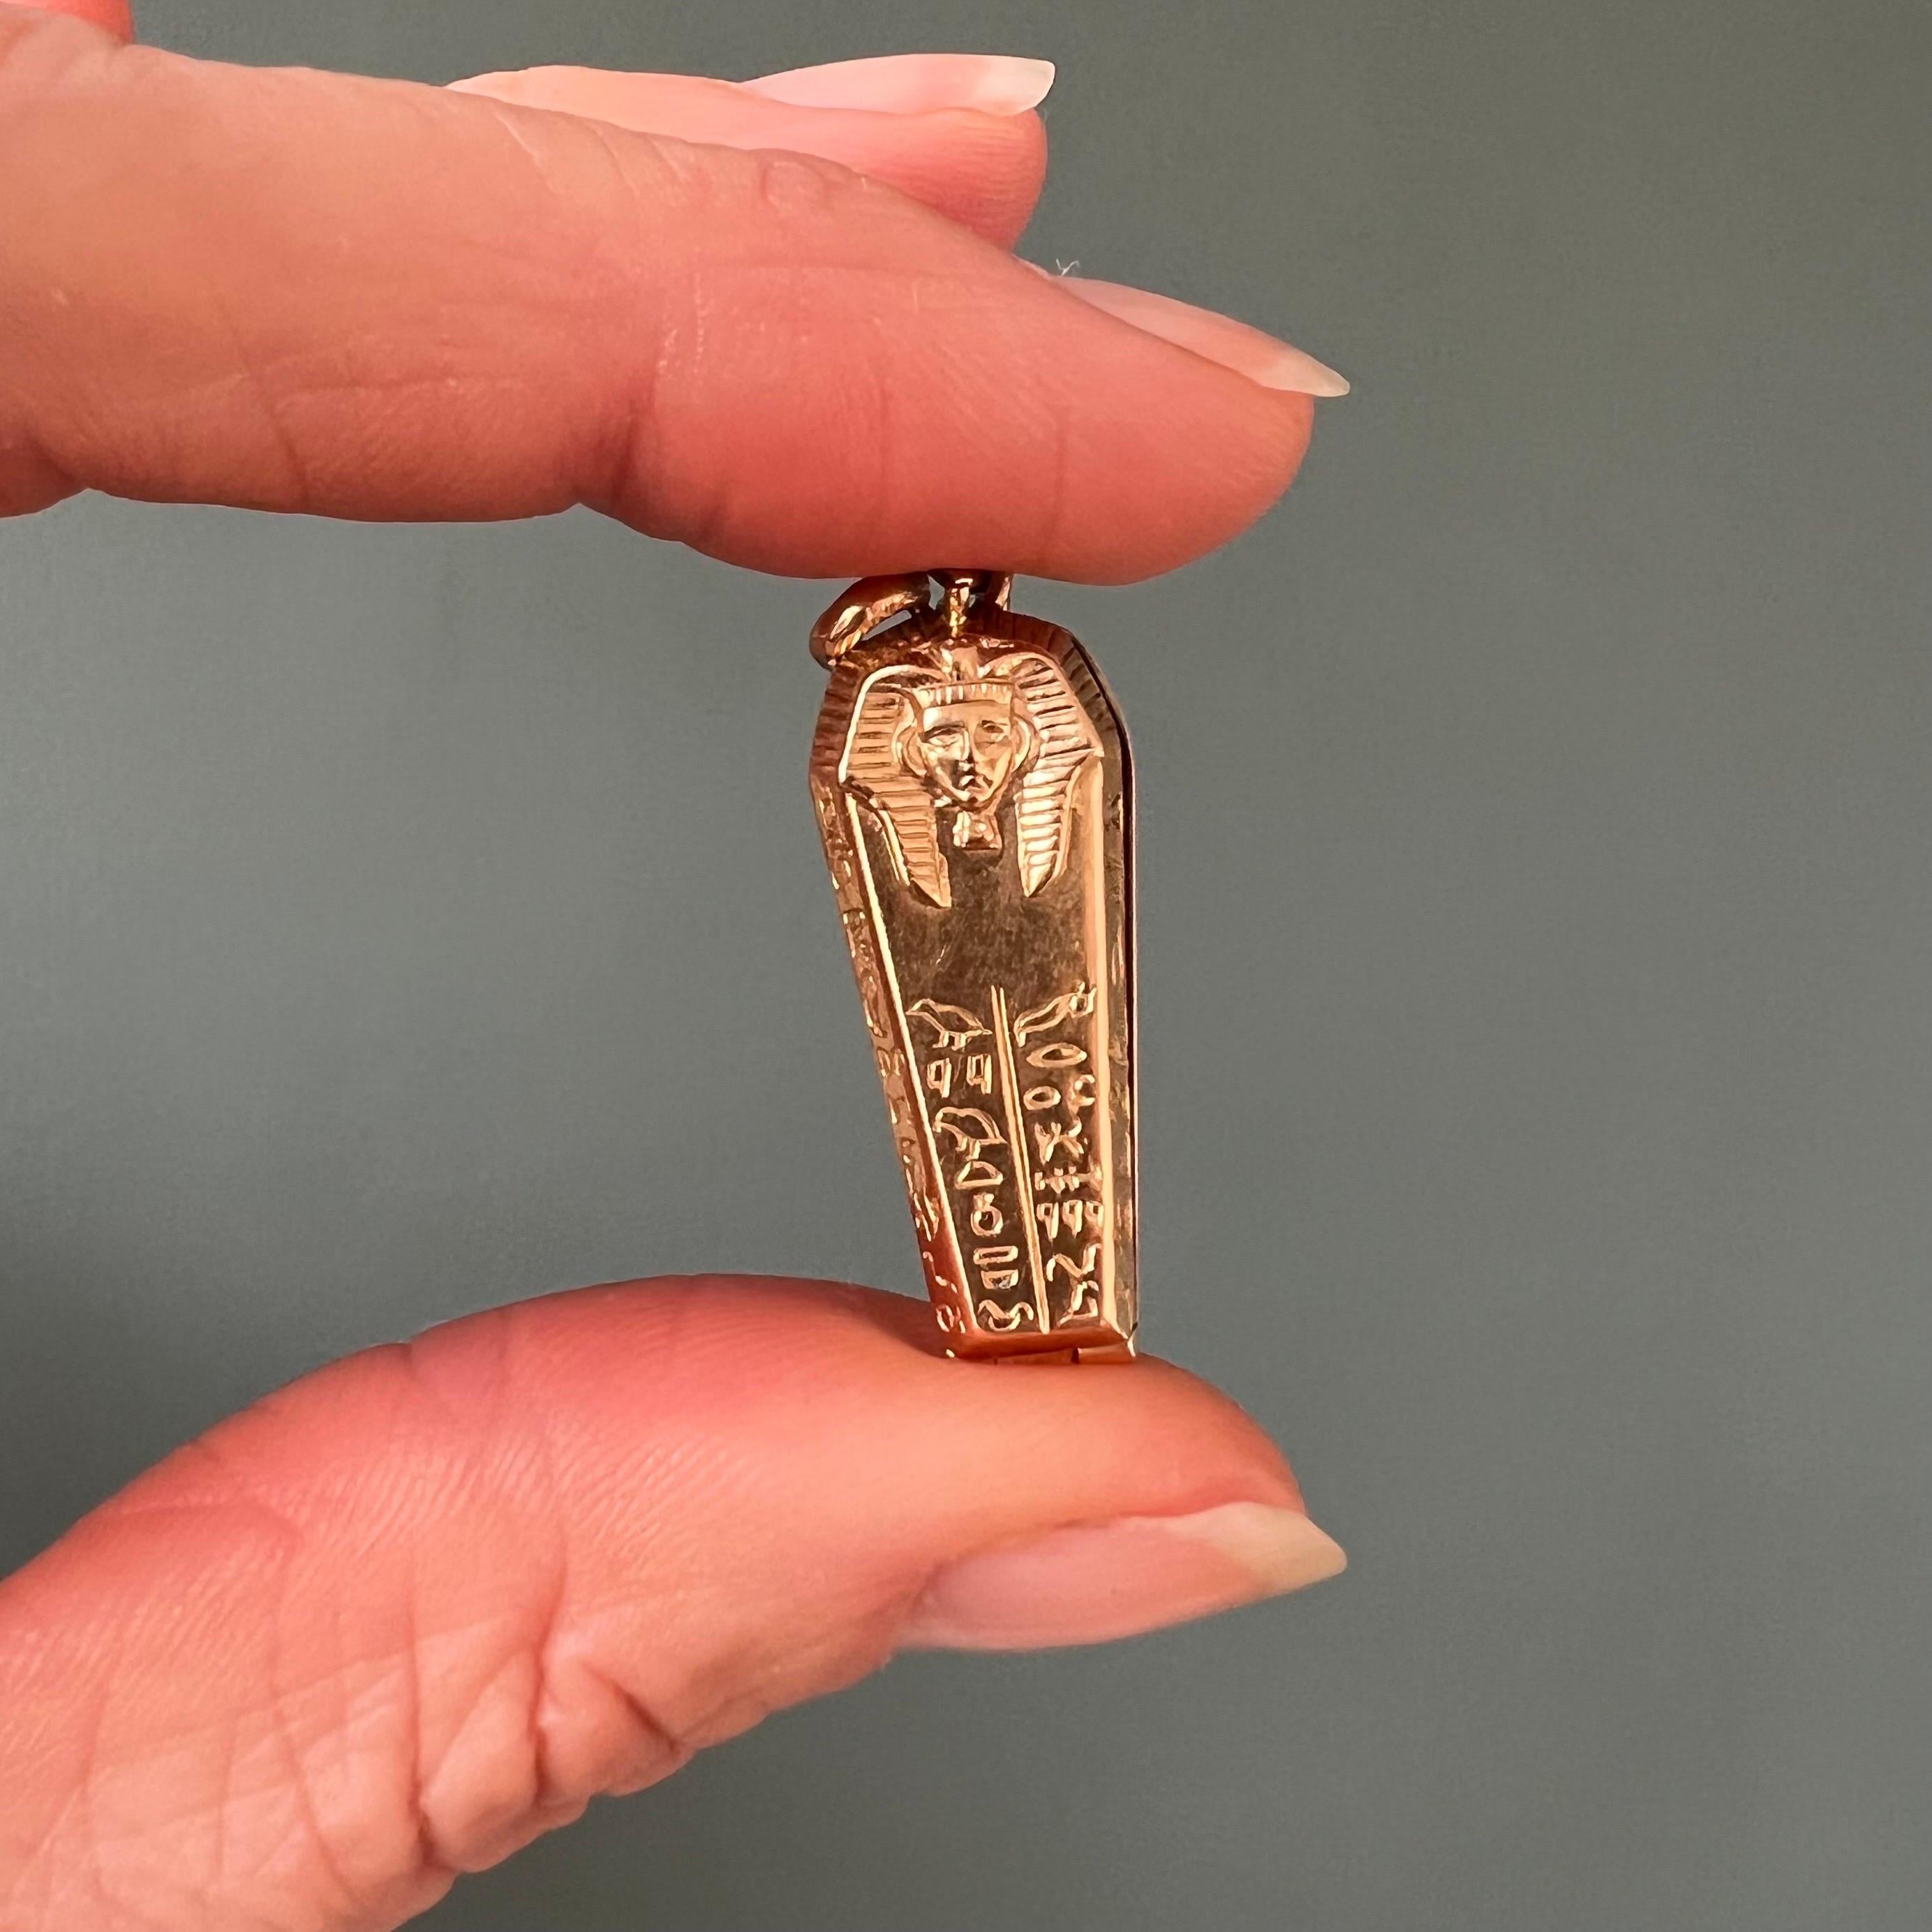 This is a vintage Pharaoh Tutankhamun charm pendant. The 18 karat yellow gold charm of King Tut's coffin is beautifully engraved with hieroglyphics and his mask. The charm has amazing features and details and the lid of King Tut's coffin opens to